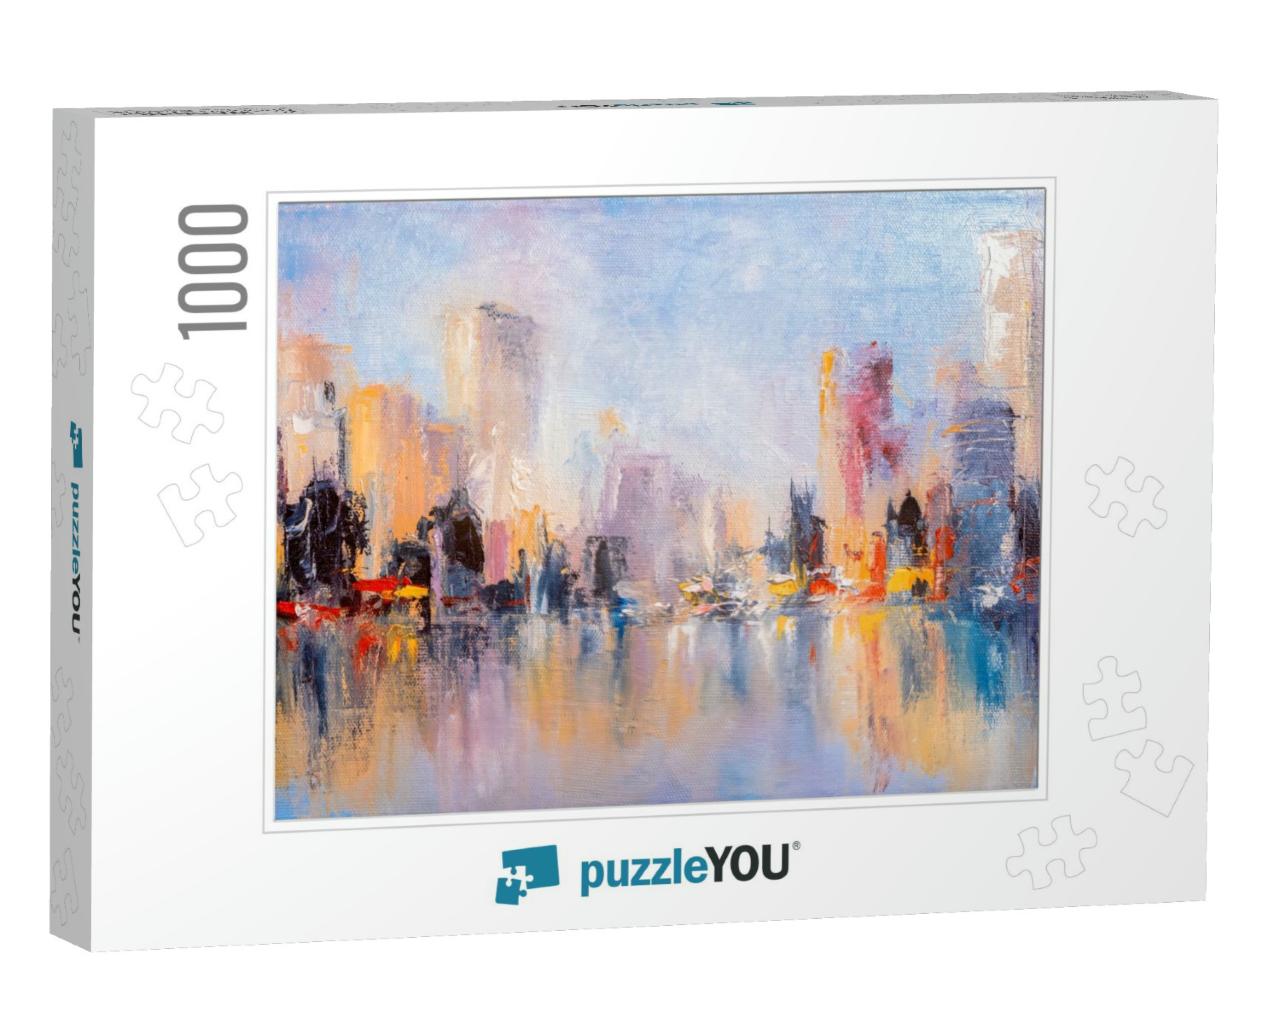 Skyline City View with Reflections on Water. Original Oil... Jigsaw Puzzle with 1000 pieces